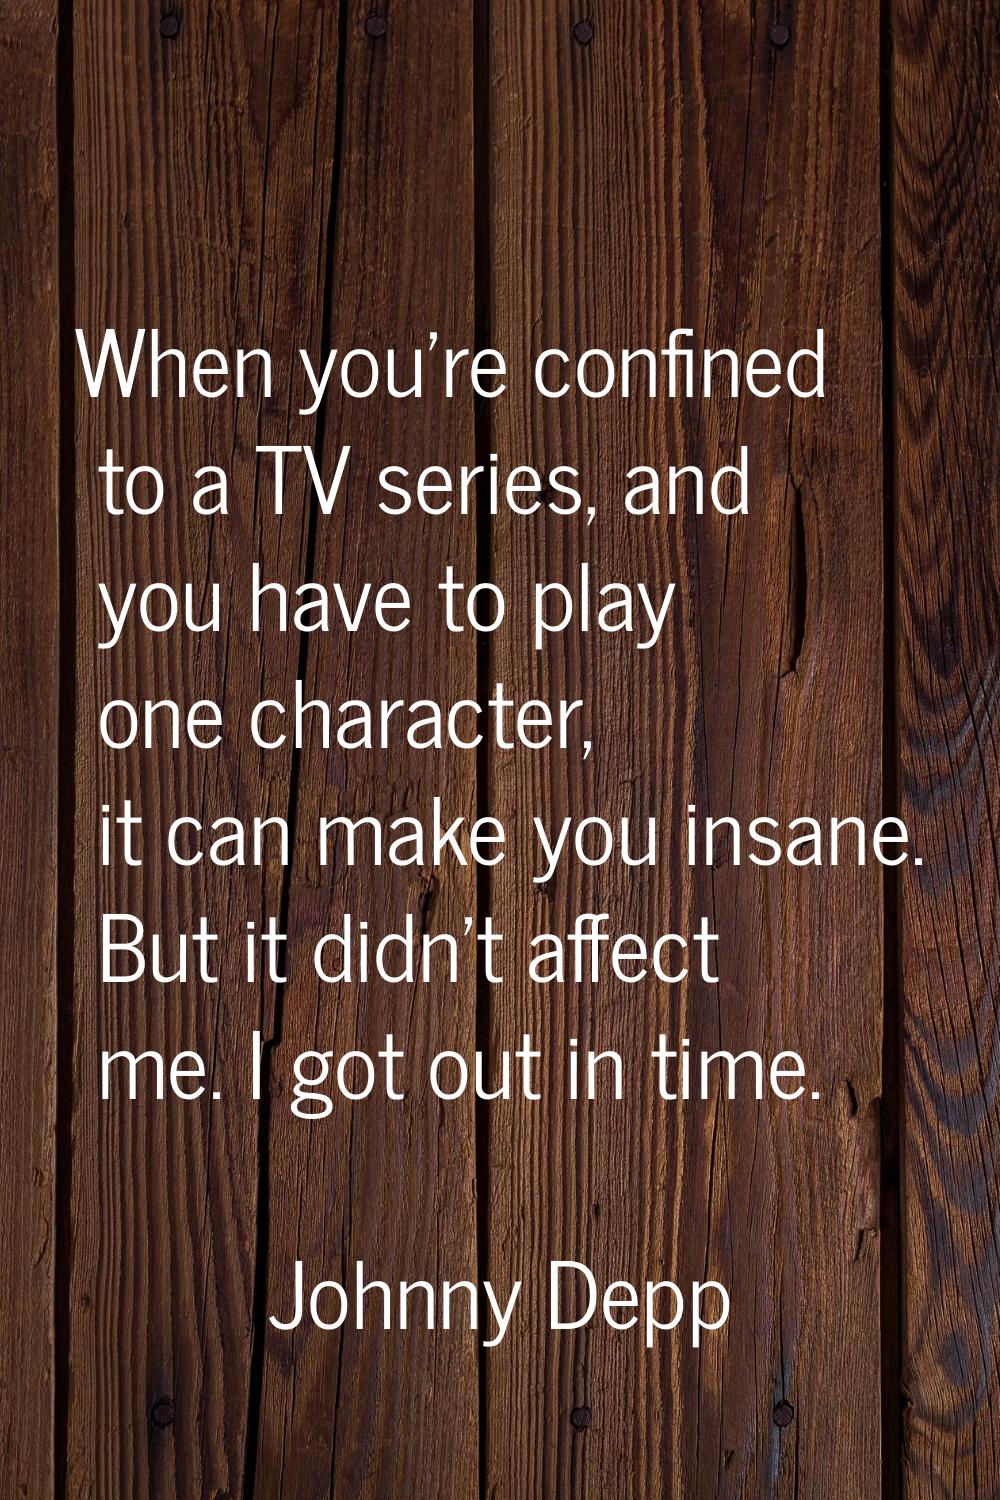 When you're confined to a TV series, and you have to play one character, it can make you insane. Bu